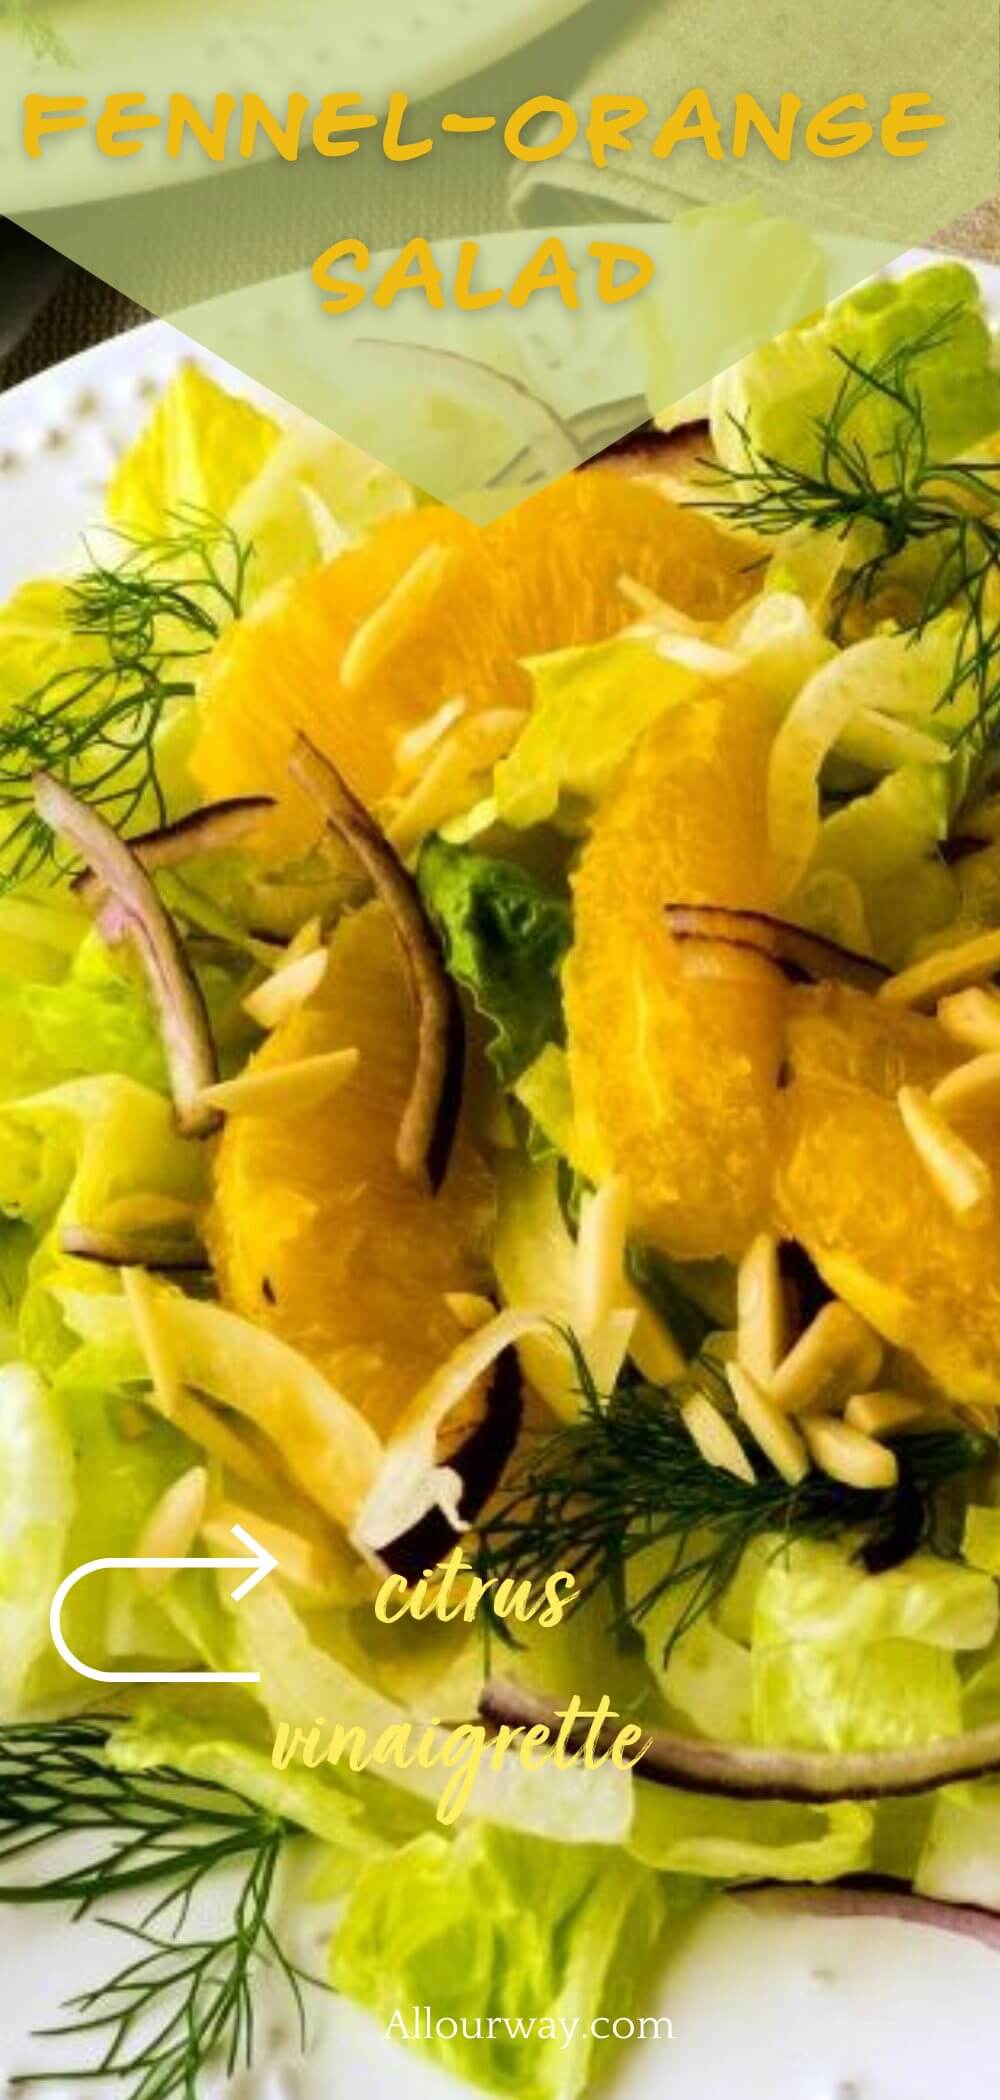 A light citrusy salad composed of shaved fennel, sweet orange segments, slivered purple onion over a bed of torn romaine leaves. Orange-Lemon vinaigrette with tarragon dresses the light citrusy salad. Tastes so fresh its a welcome side with any main dish. #fennelsalad #citrussalad #romainesalad #citrusvinaigrette